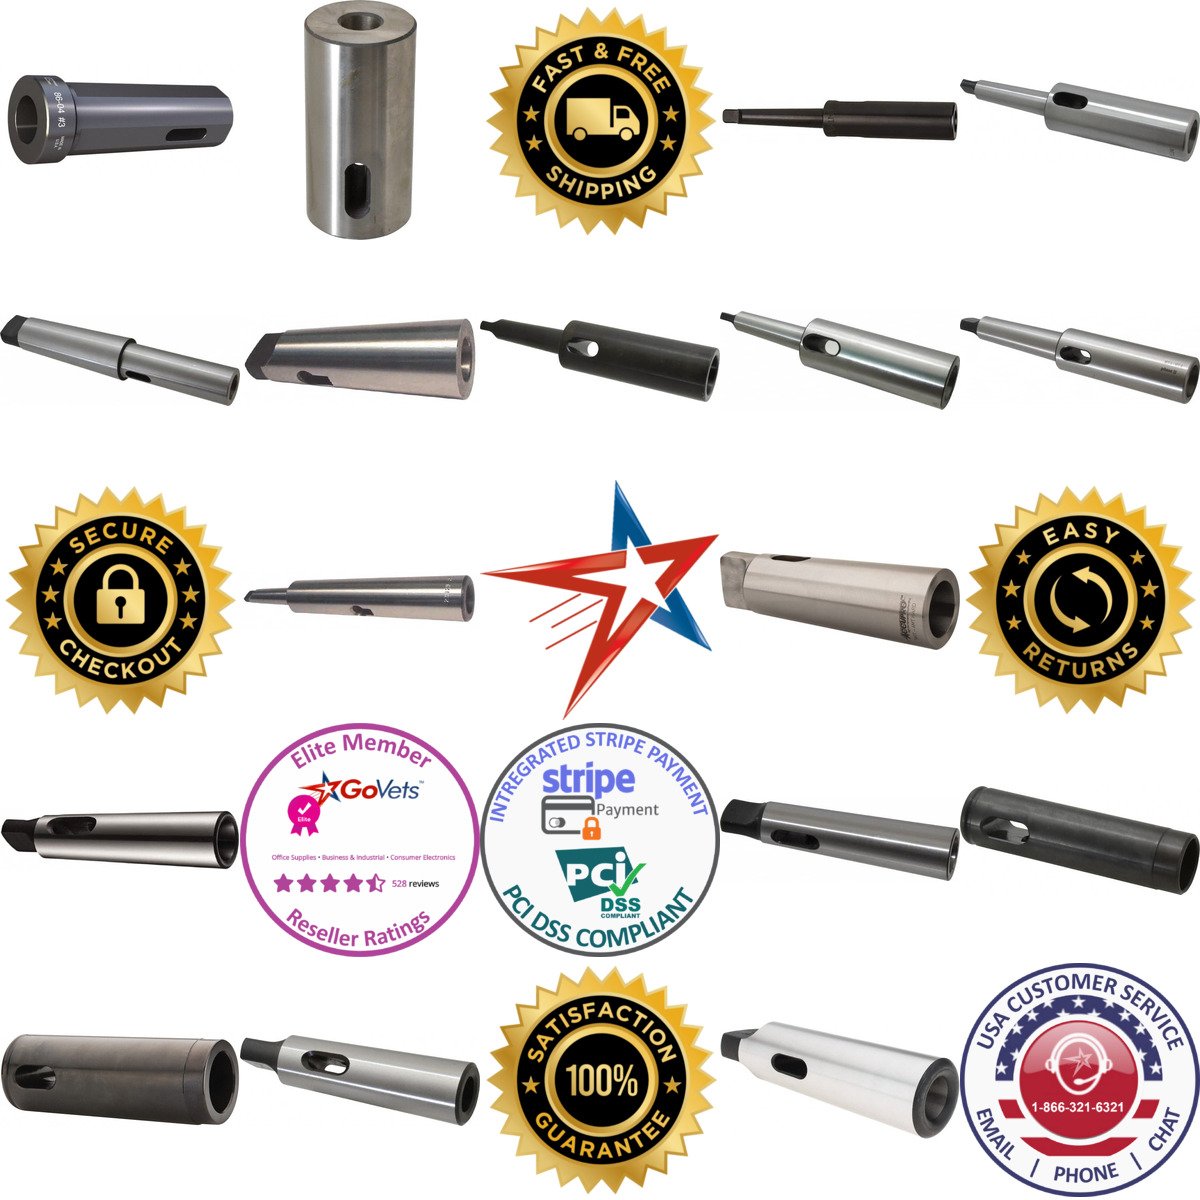 A selection of Morse Taper Sleeves and Sockets products on GoVets